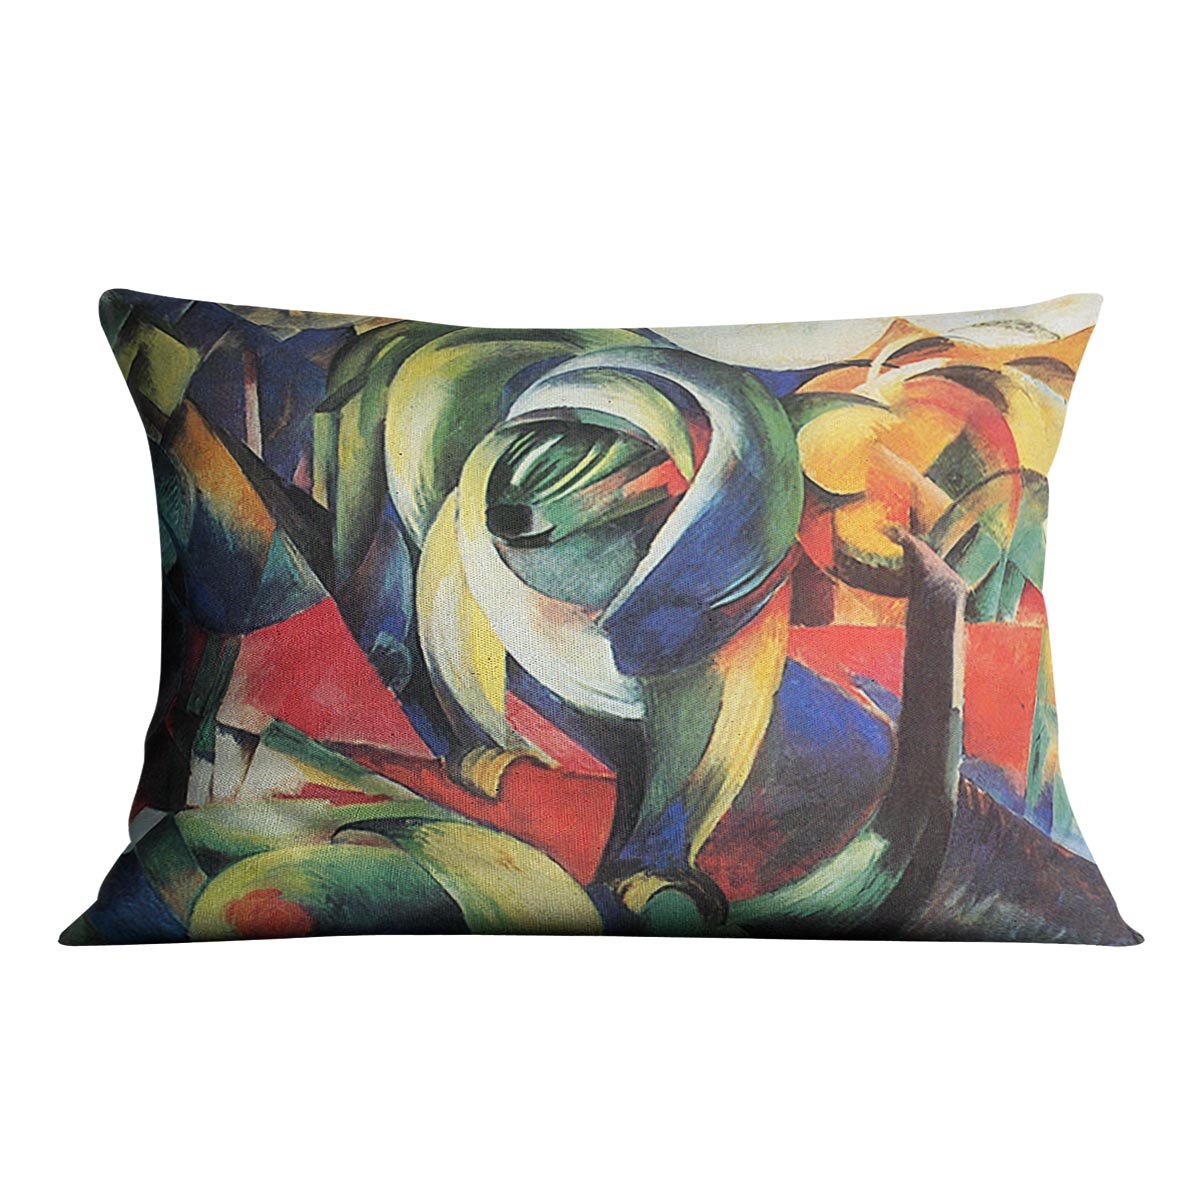 The Mandrill by Franz Marc Throw Pillow